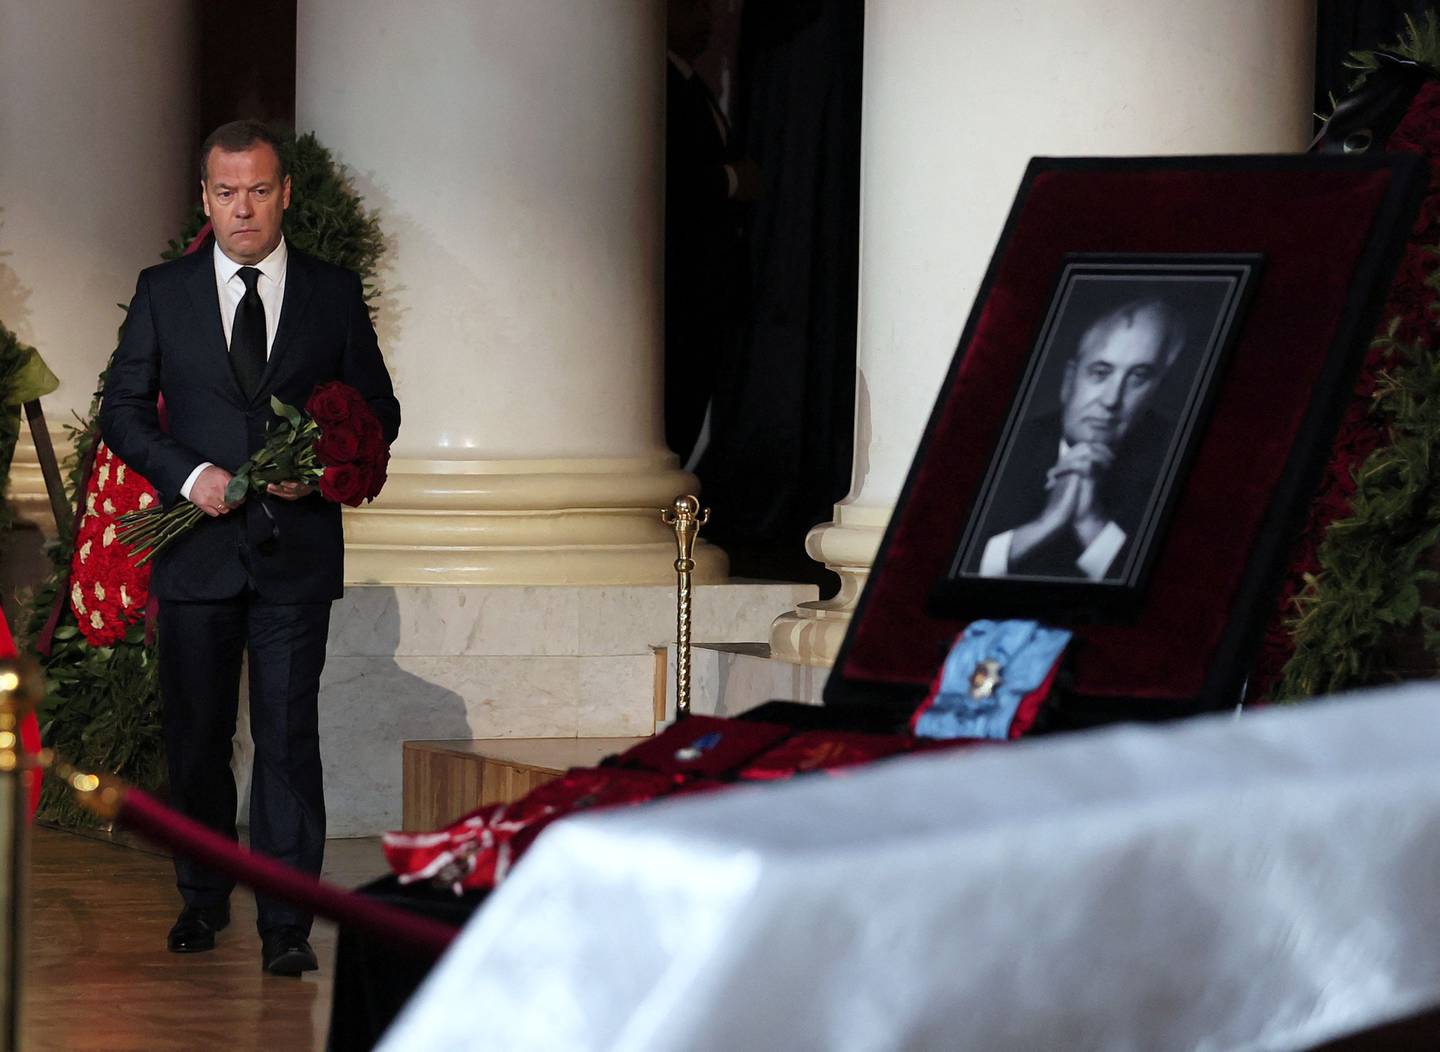 Deputy Chairman of the Russian Security Council Dmitry Medvedev attends the funeral of Mikhail Gorbachev. AFP